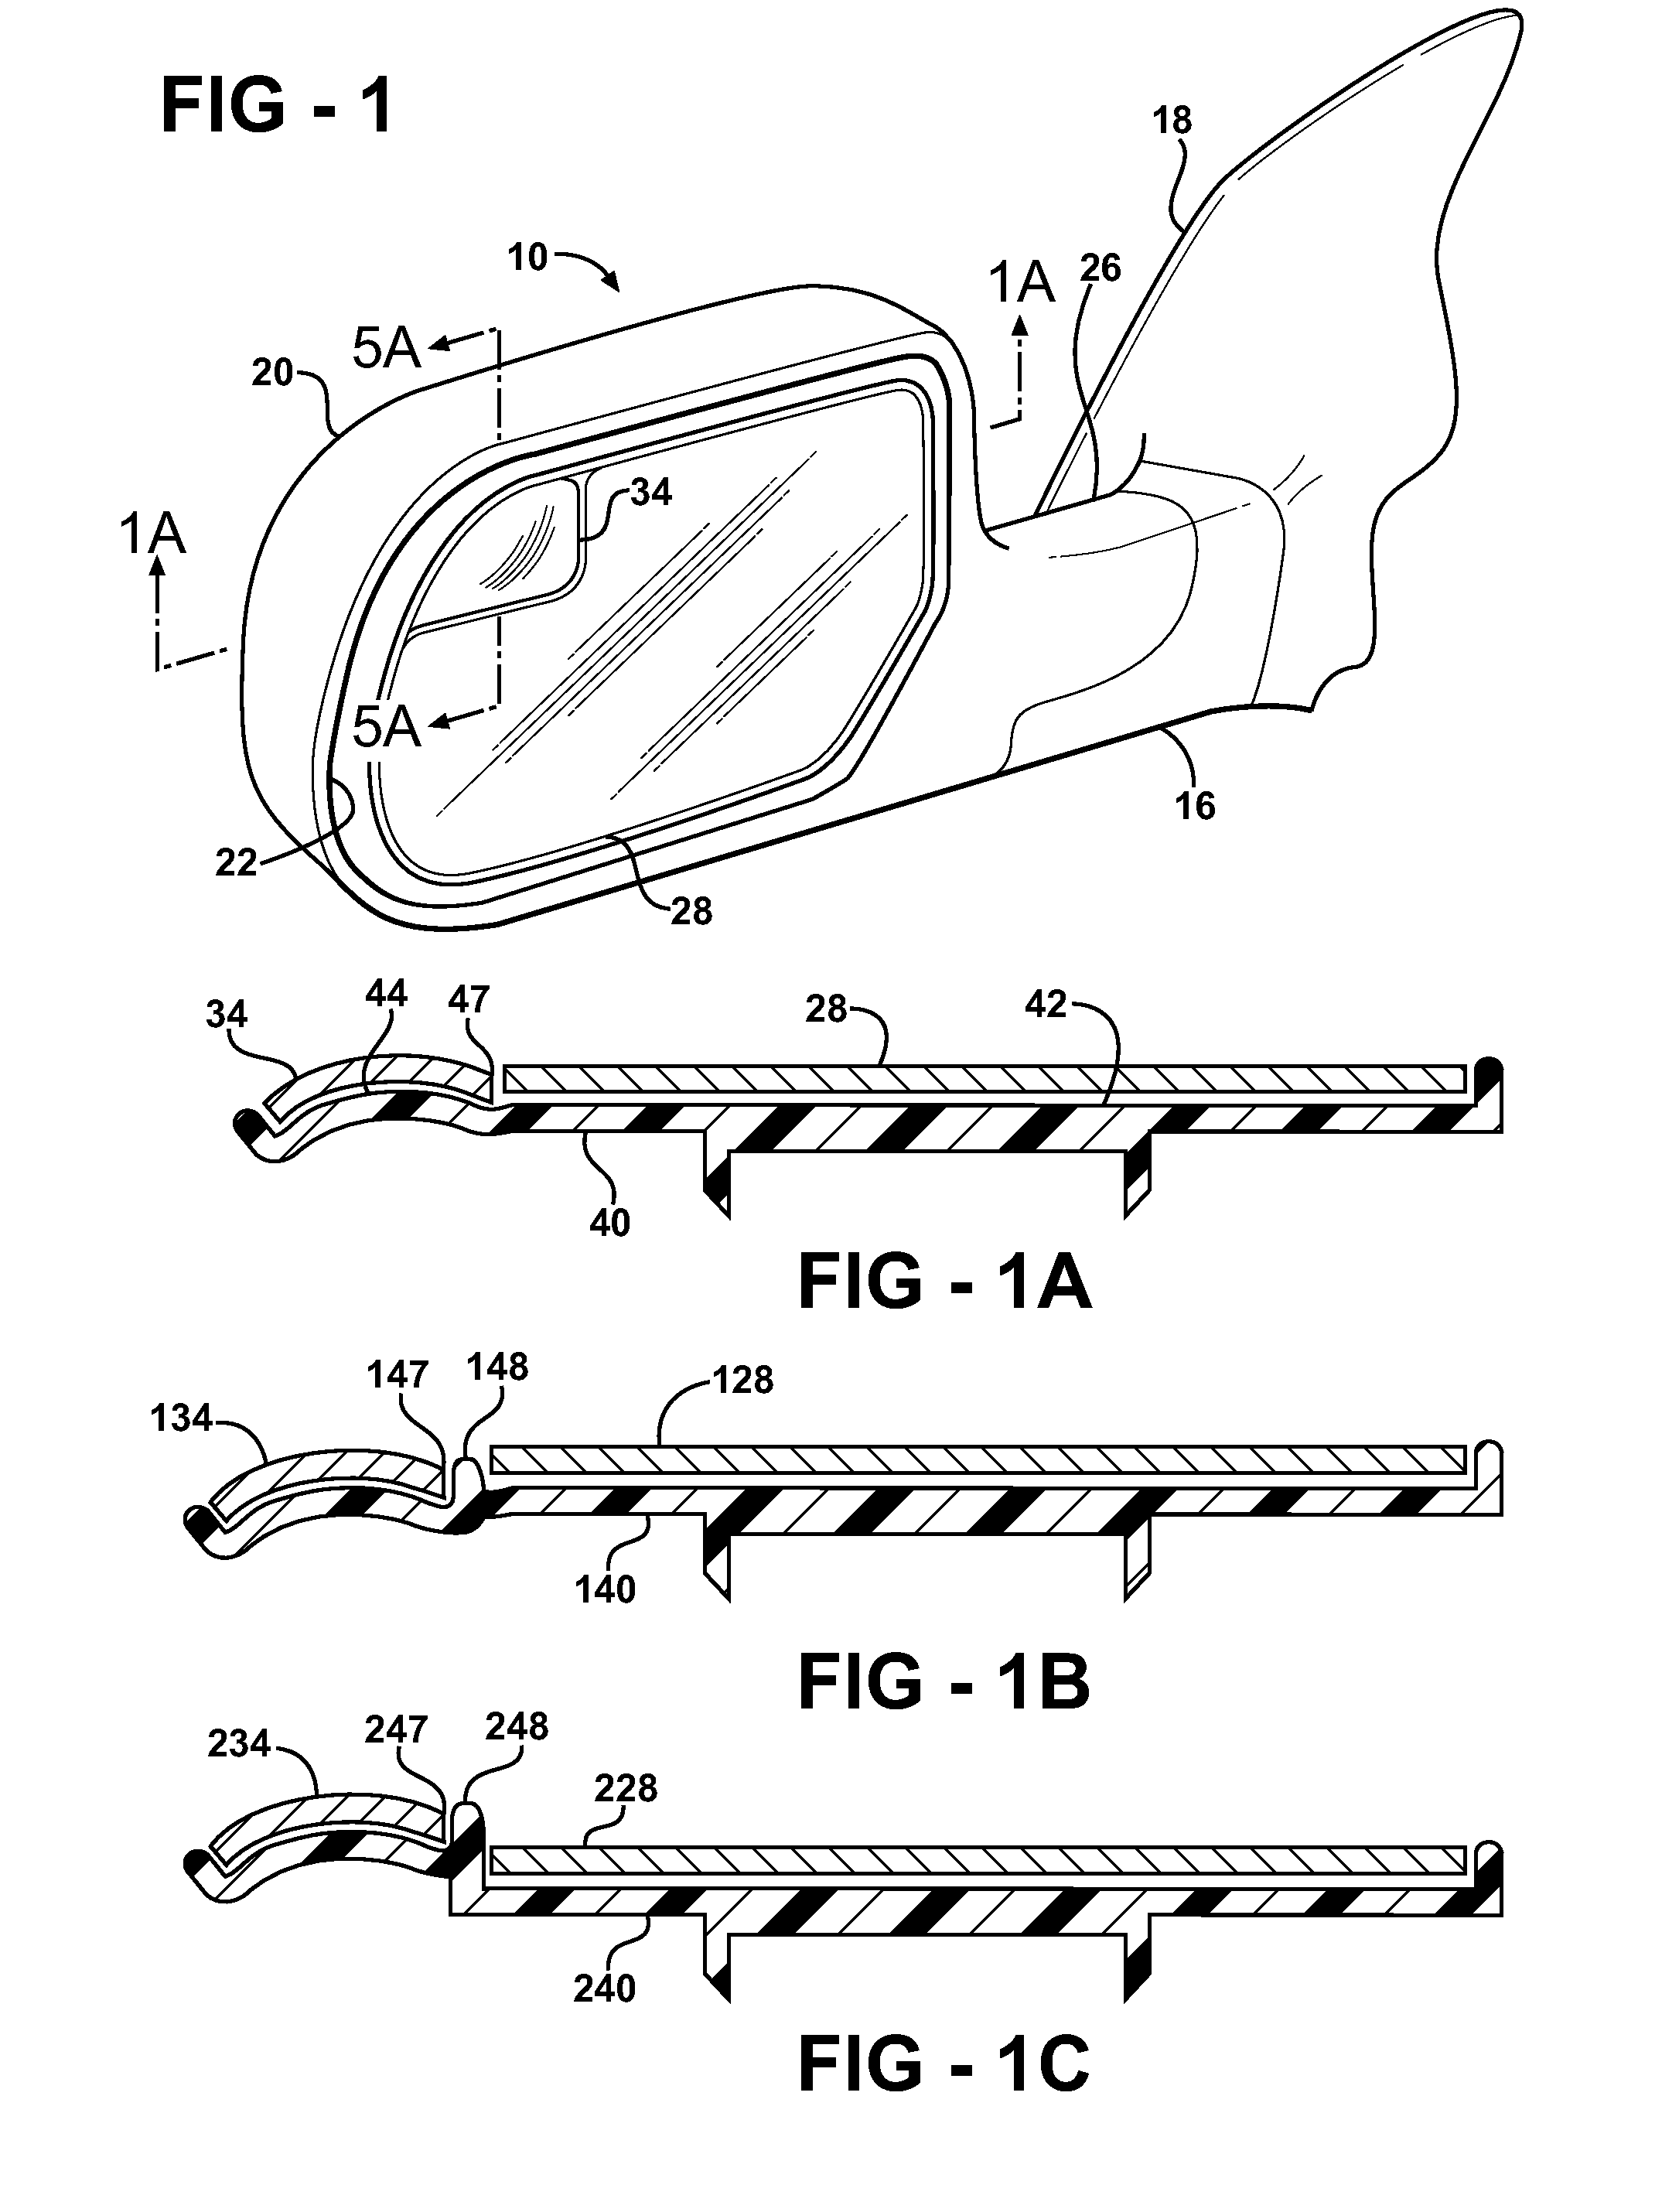 Exterior Rearview Mirror for Motor Vehicles